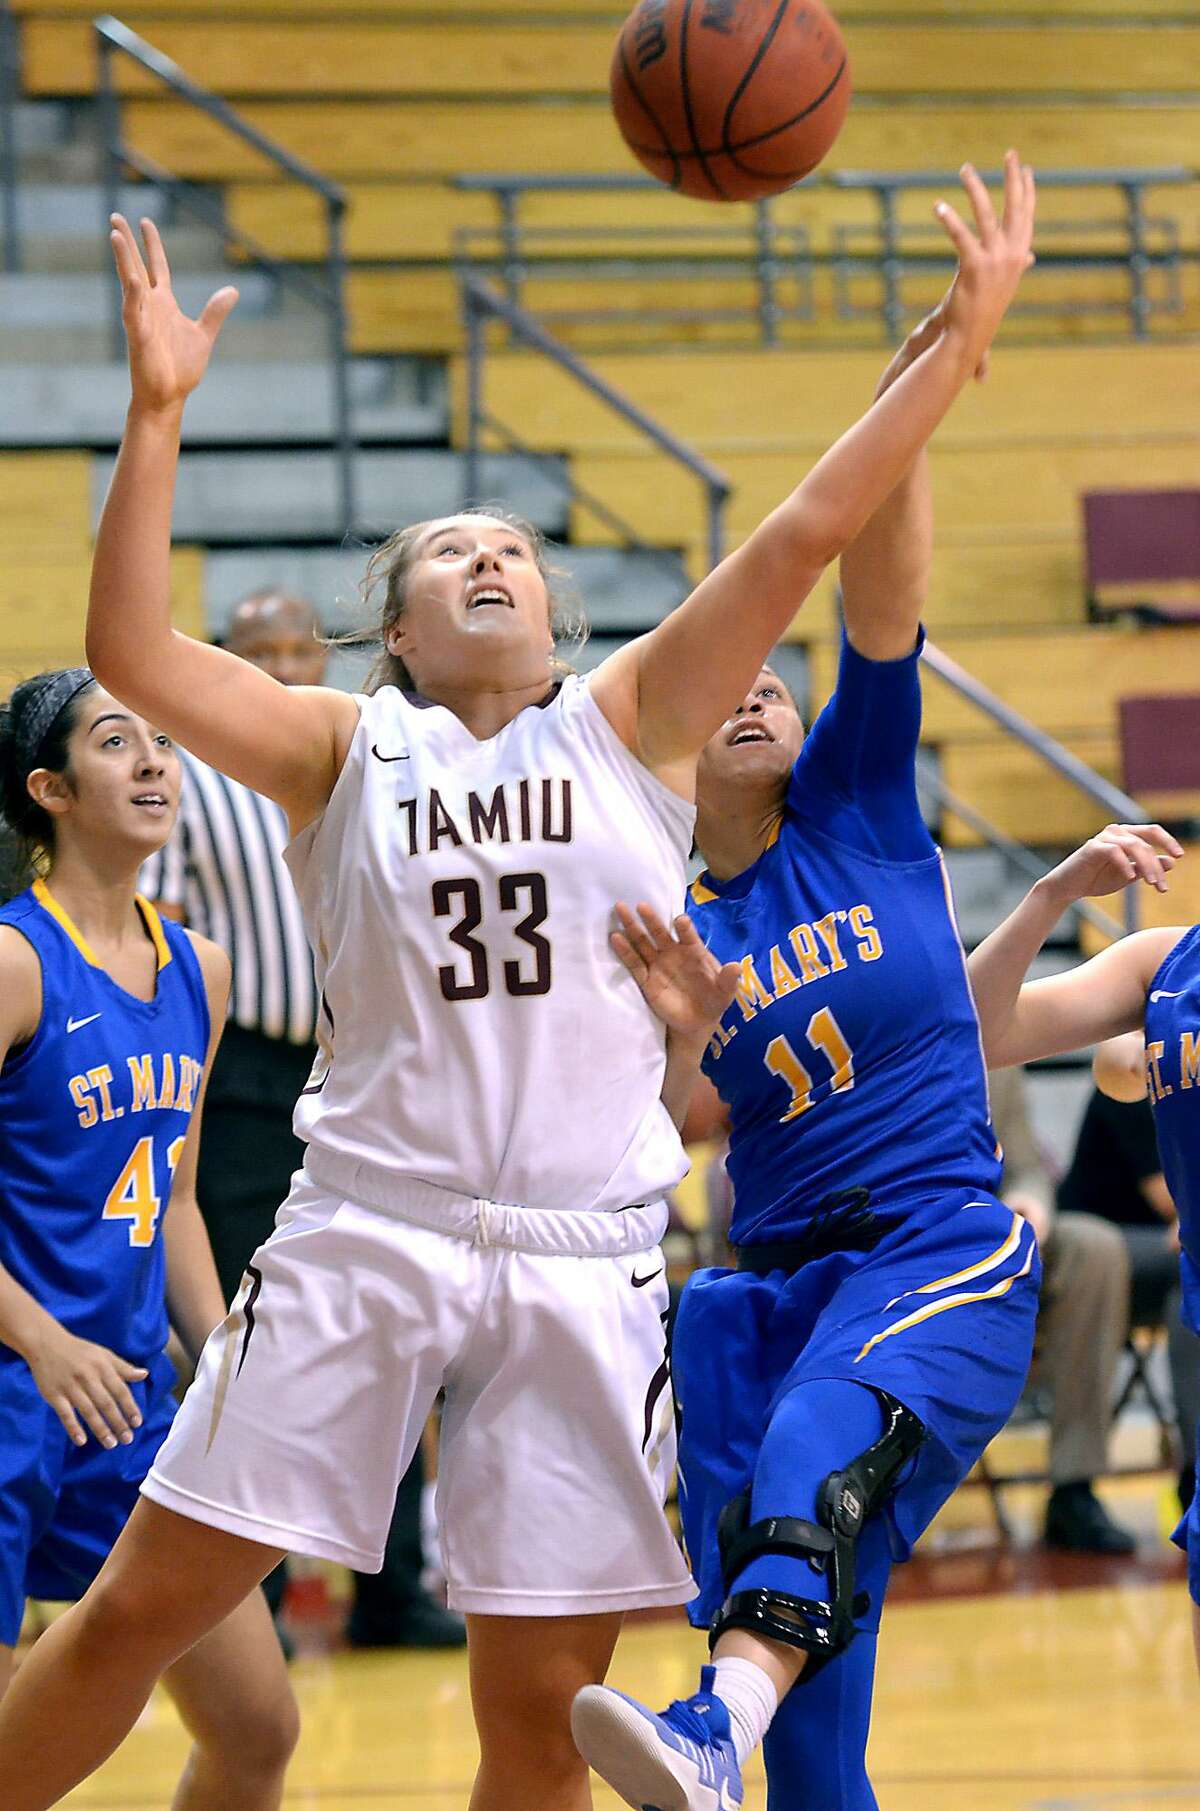 TAMIU’s Hannah Beede and the Dustdevils, despite a loss, clinched a spot in the Heartland Conference tournament.